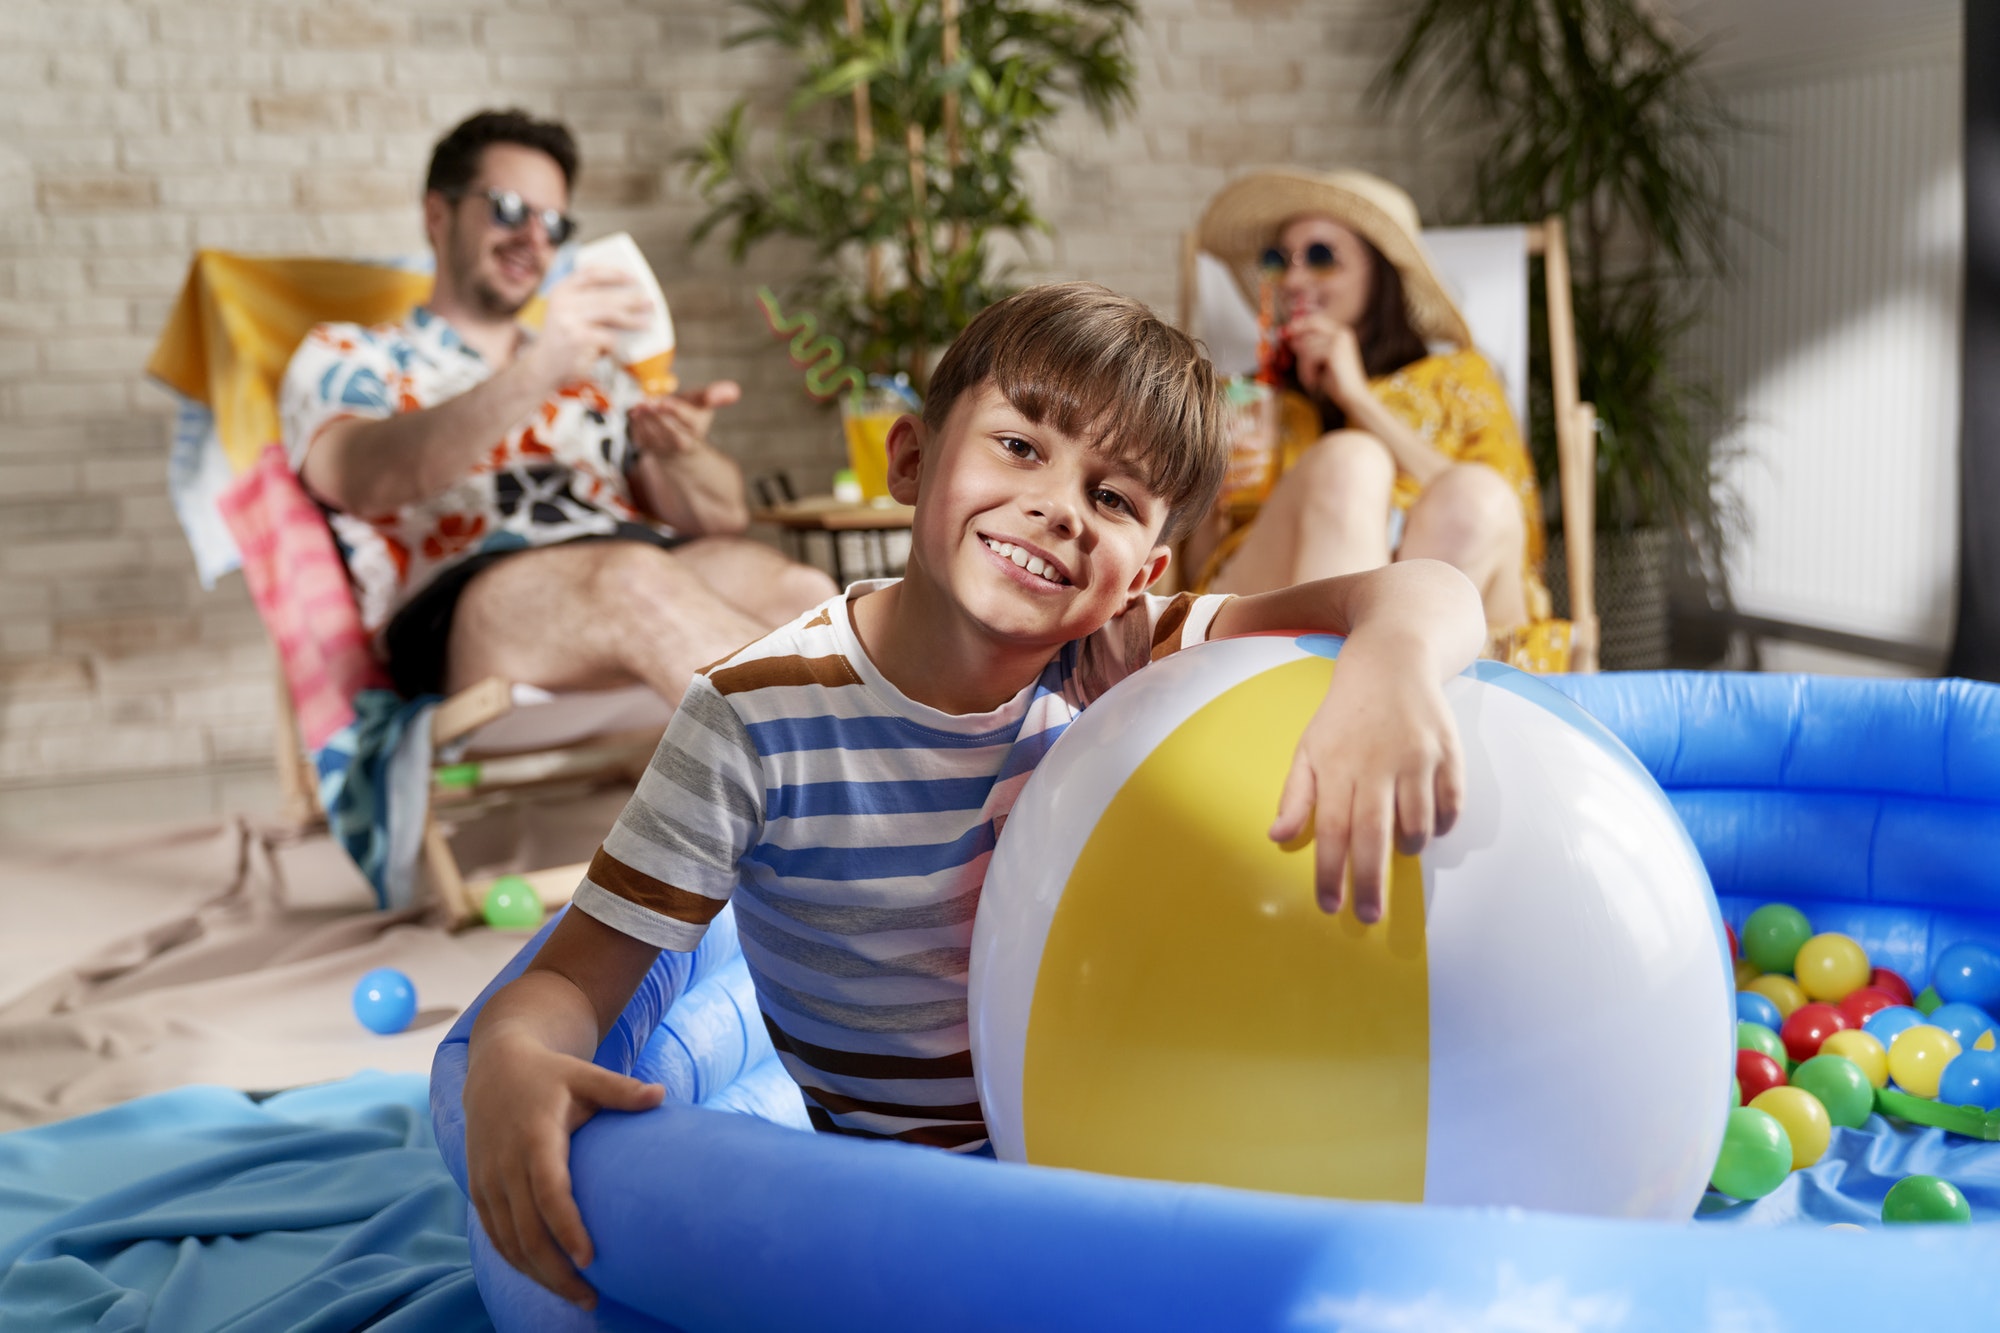 Portrait of relaxed boy in an inflatable ball pool at home